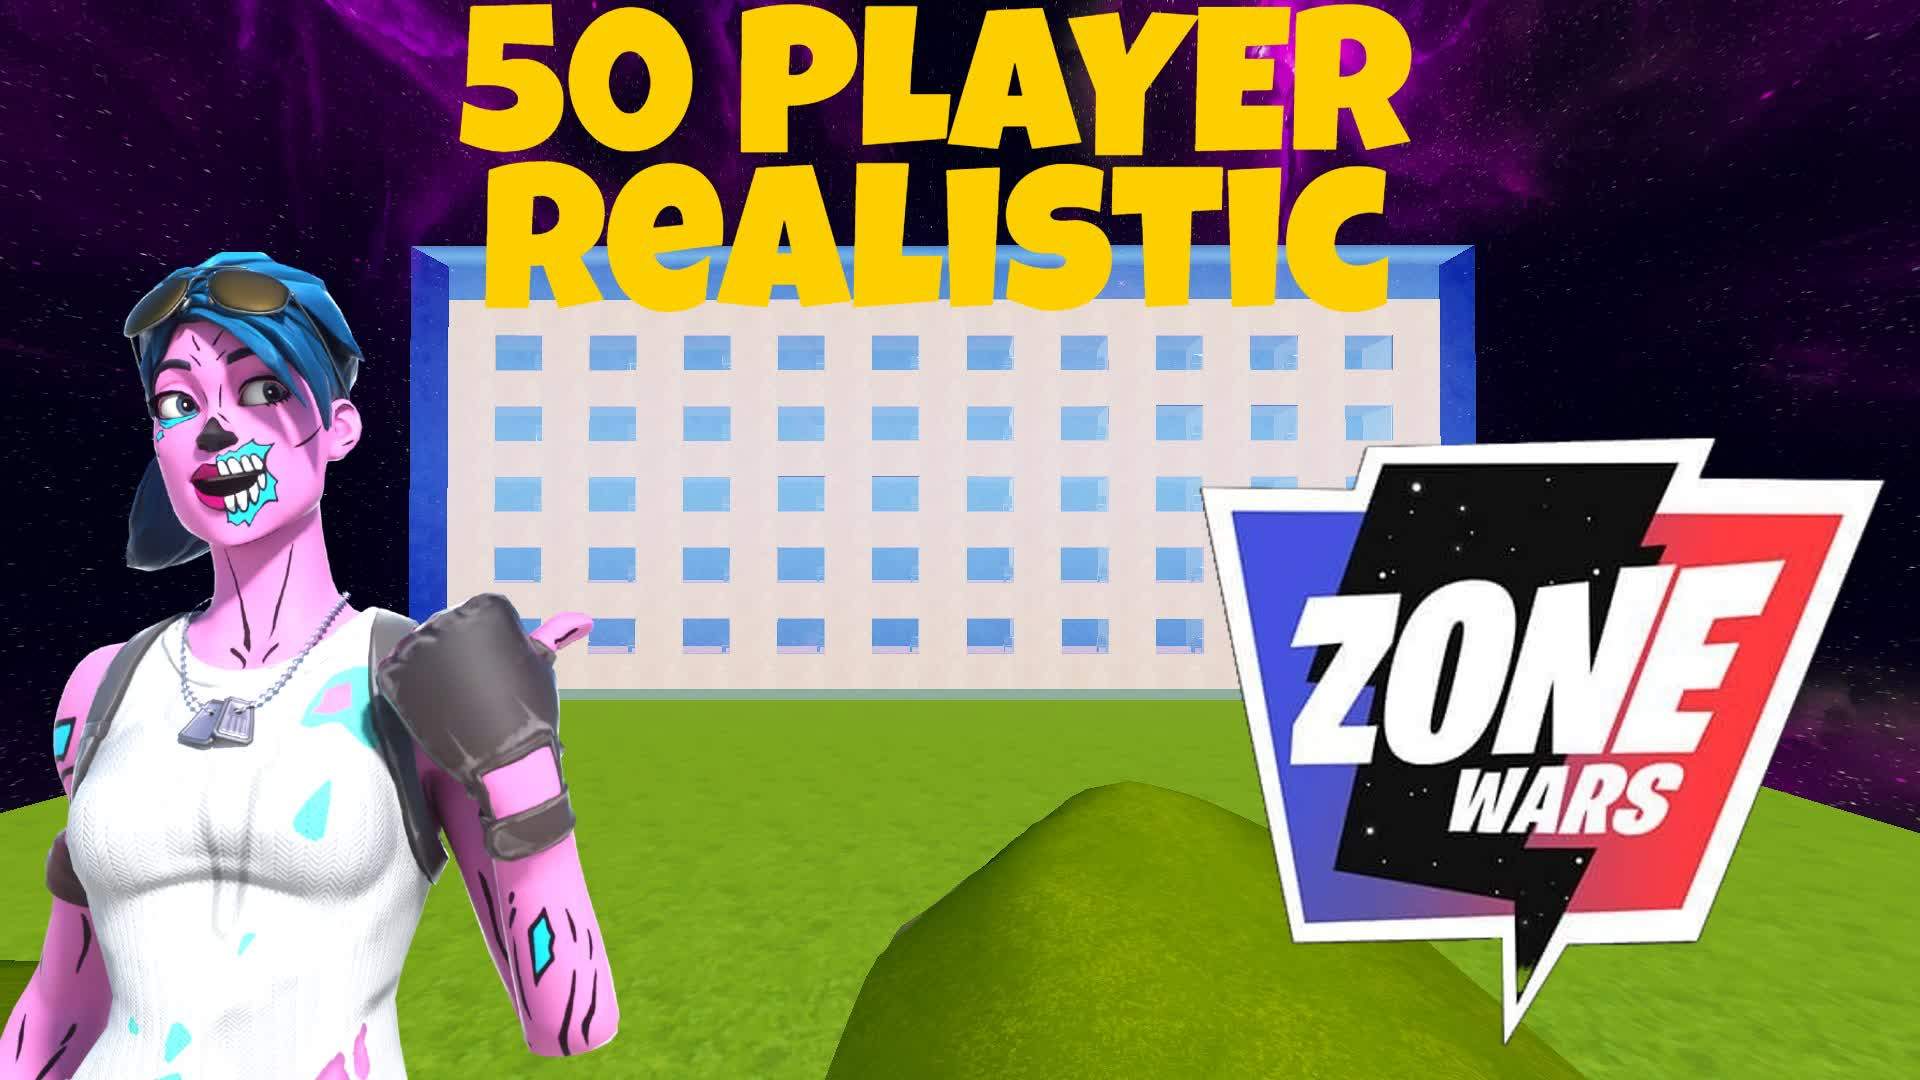 50 Player Realistic Zone Wars